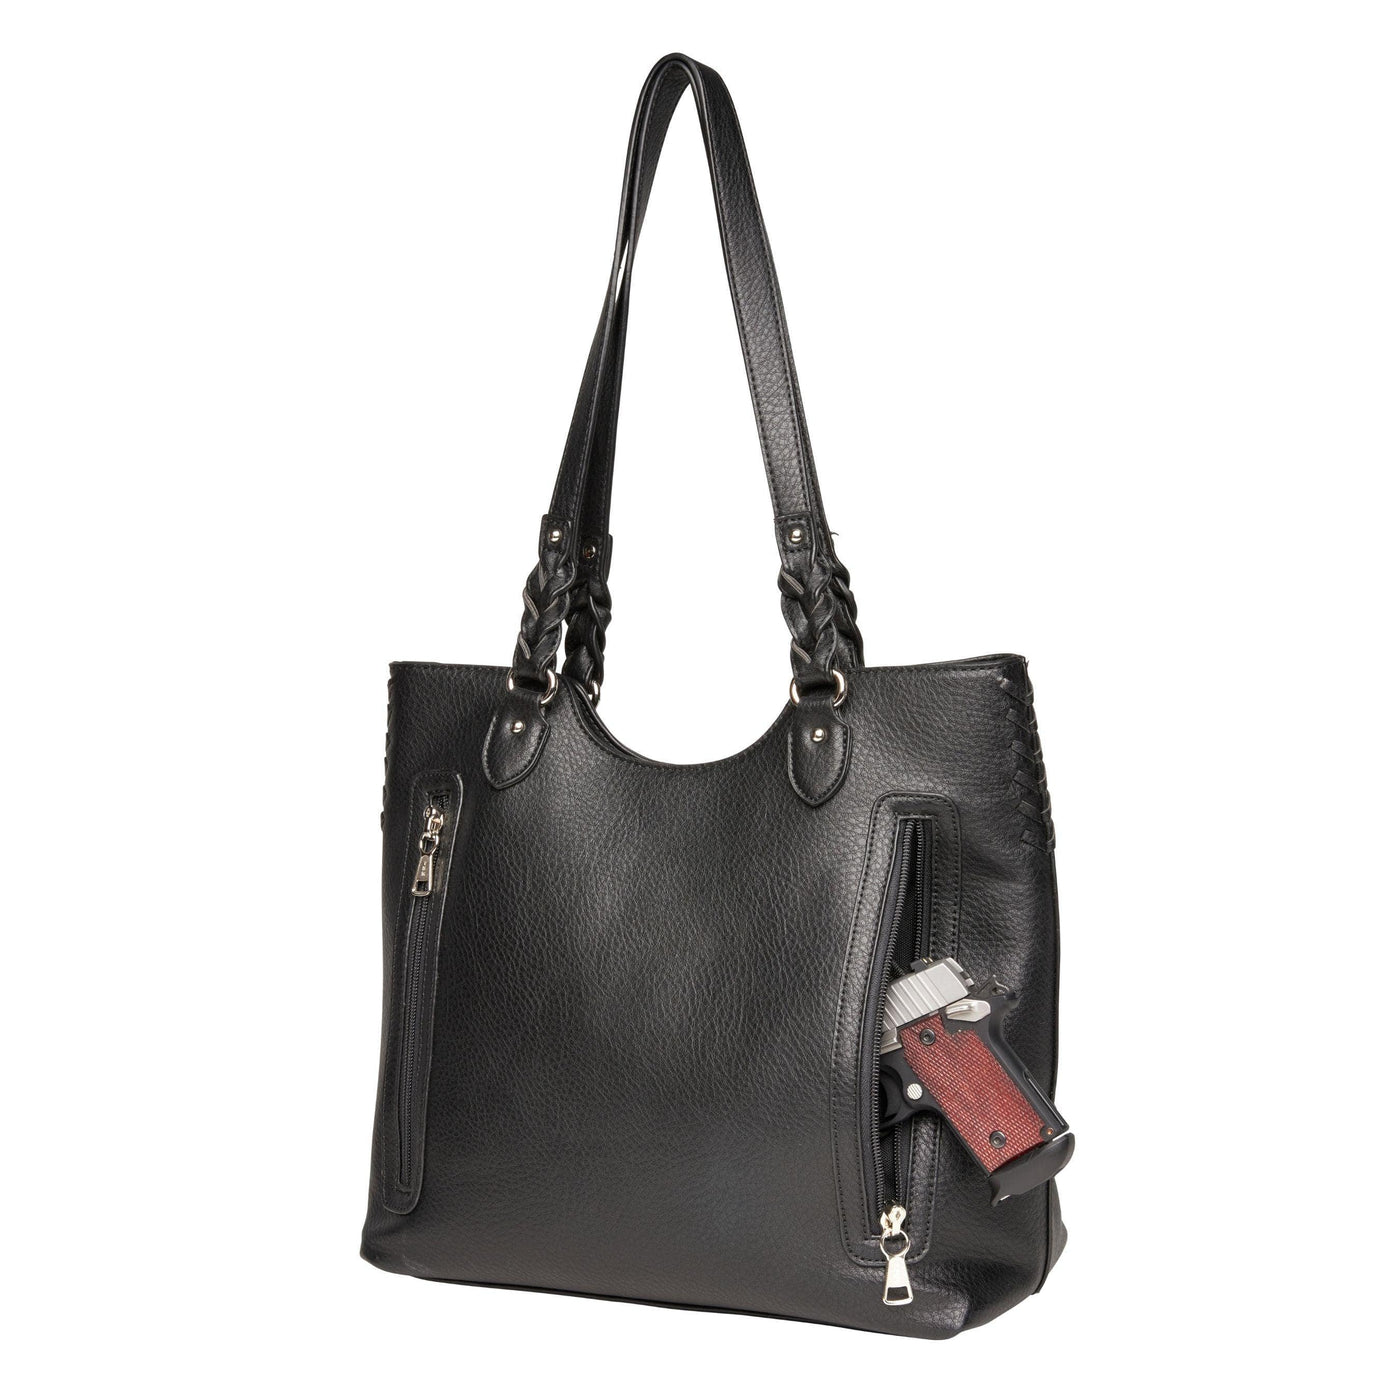  Concealed Carry Riley Tote -  Lady Conceal -  Concealed Carry Purse -  Designer Luxury Leather Carry Handbag -  carry Handbag for gun carry -  Unique Tote gun Handbag -  designer backpack purse -  designer purse sale -  designer purse sales -  womens designer purse sale -  Riley Leather Tote -  designer lady purse concealed carry gun Handbag -   concealed carry Handbag for woman-  Easy Conceal Carry and Draw Purse